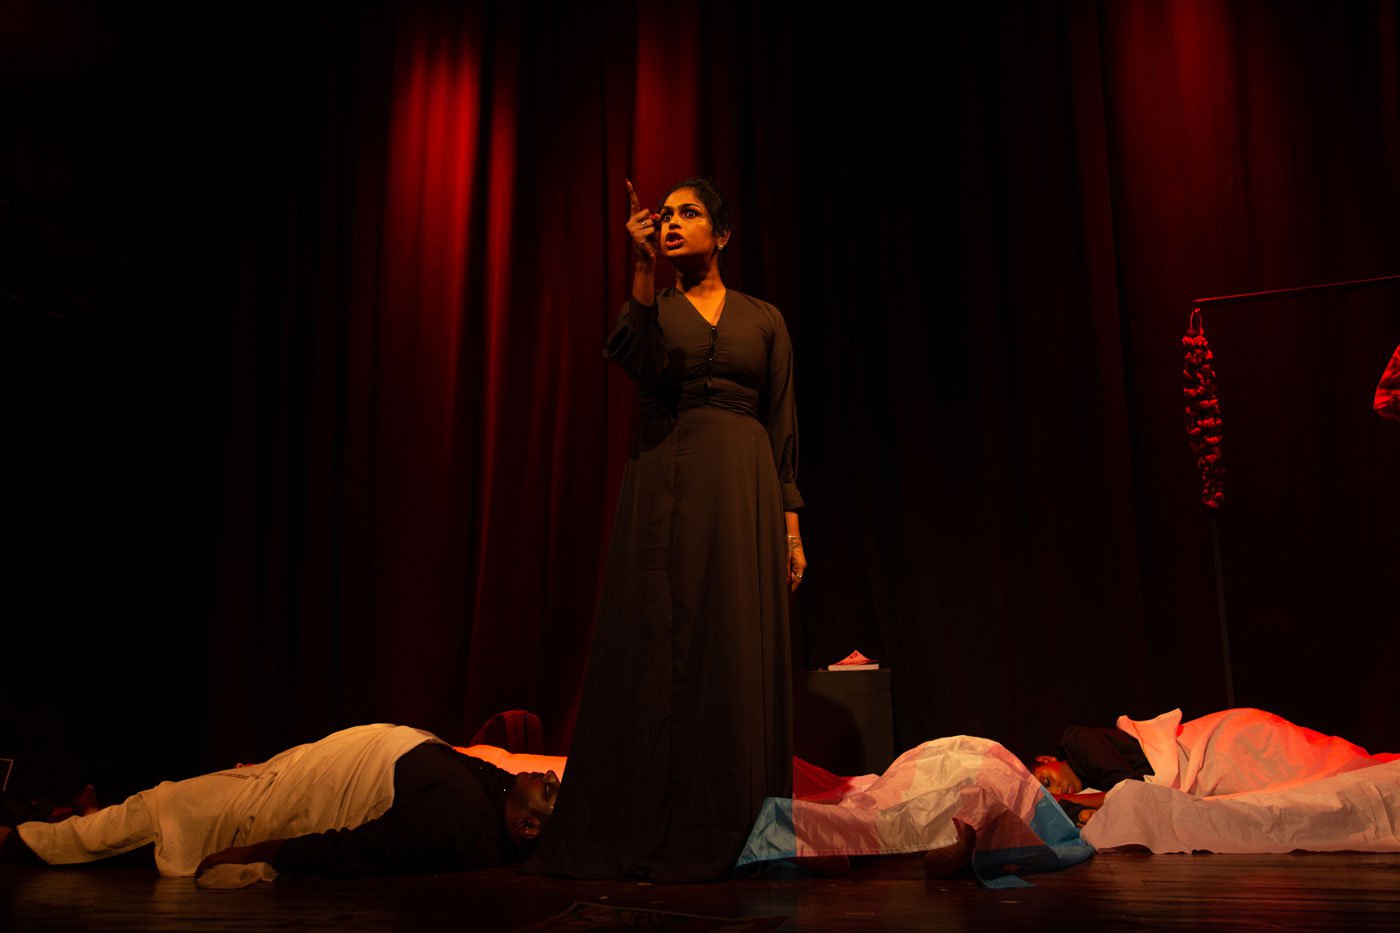 In the play, Negha questions the silence of society around harassment and violence experienced by the trans community